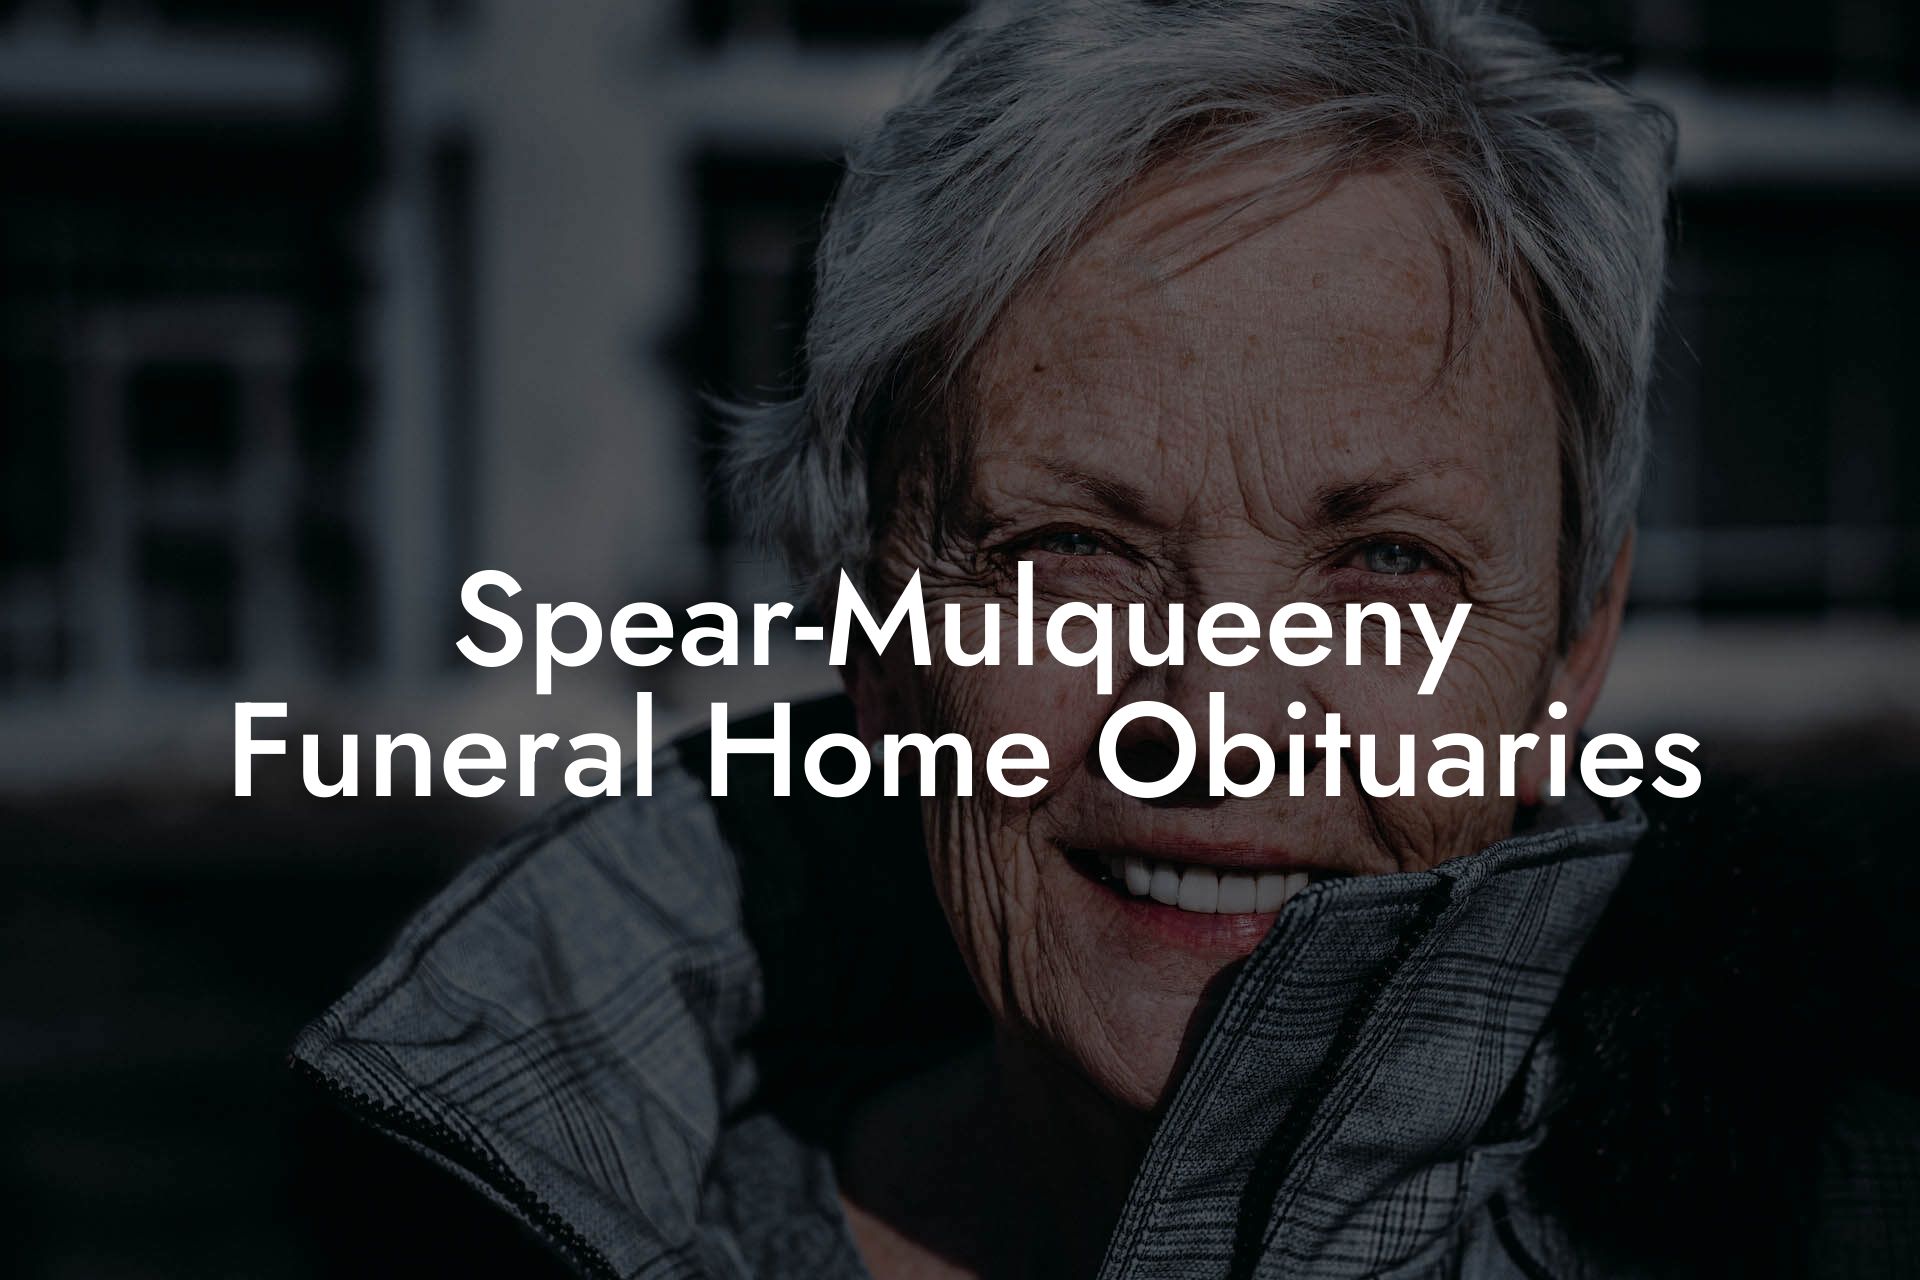 Spear-Mulqueeny Funeral Home Obituaries